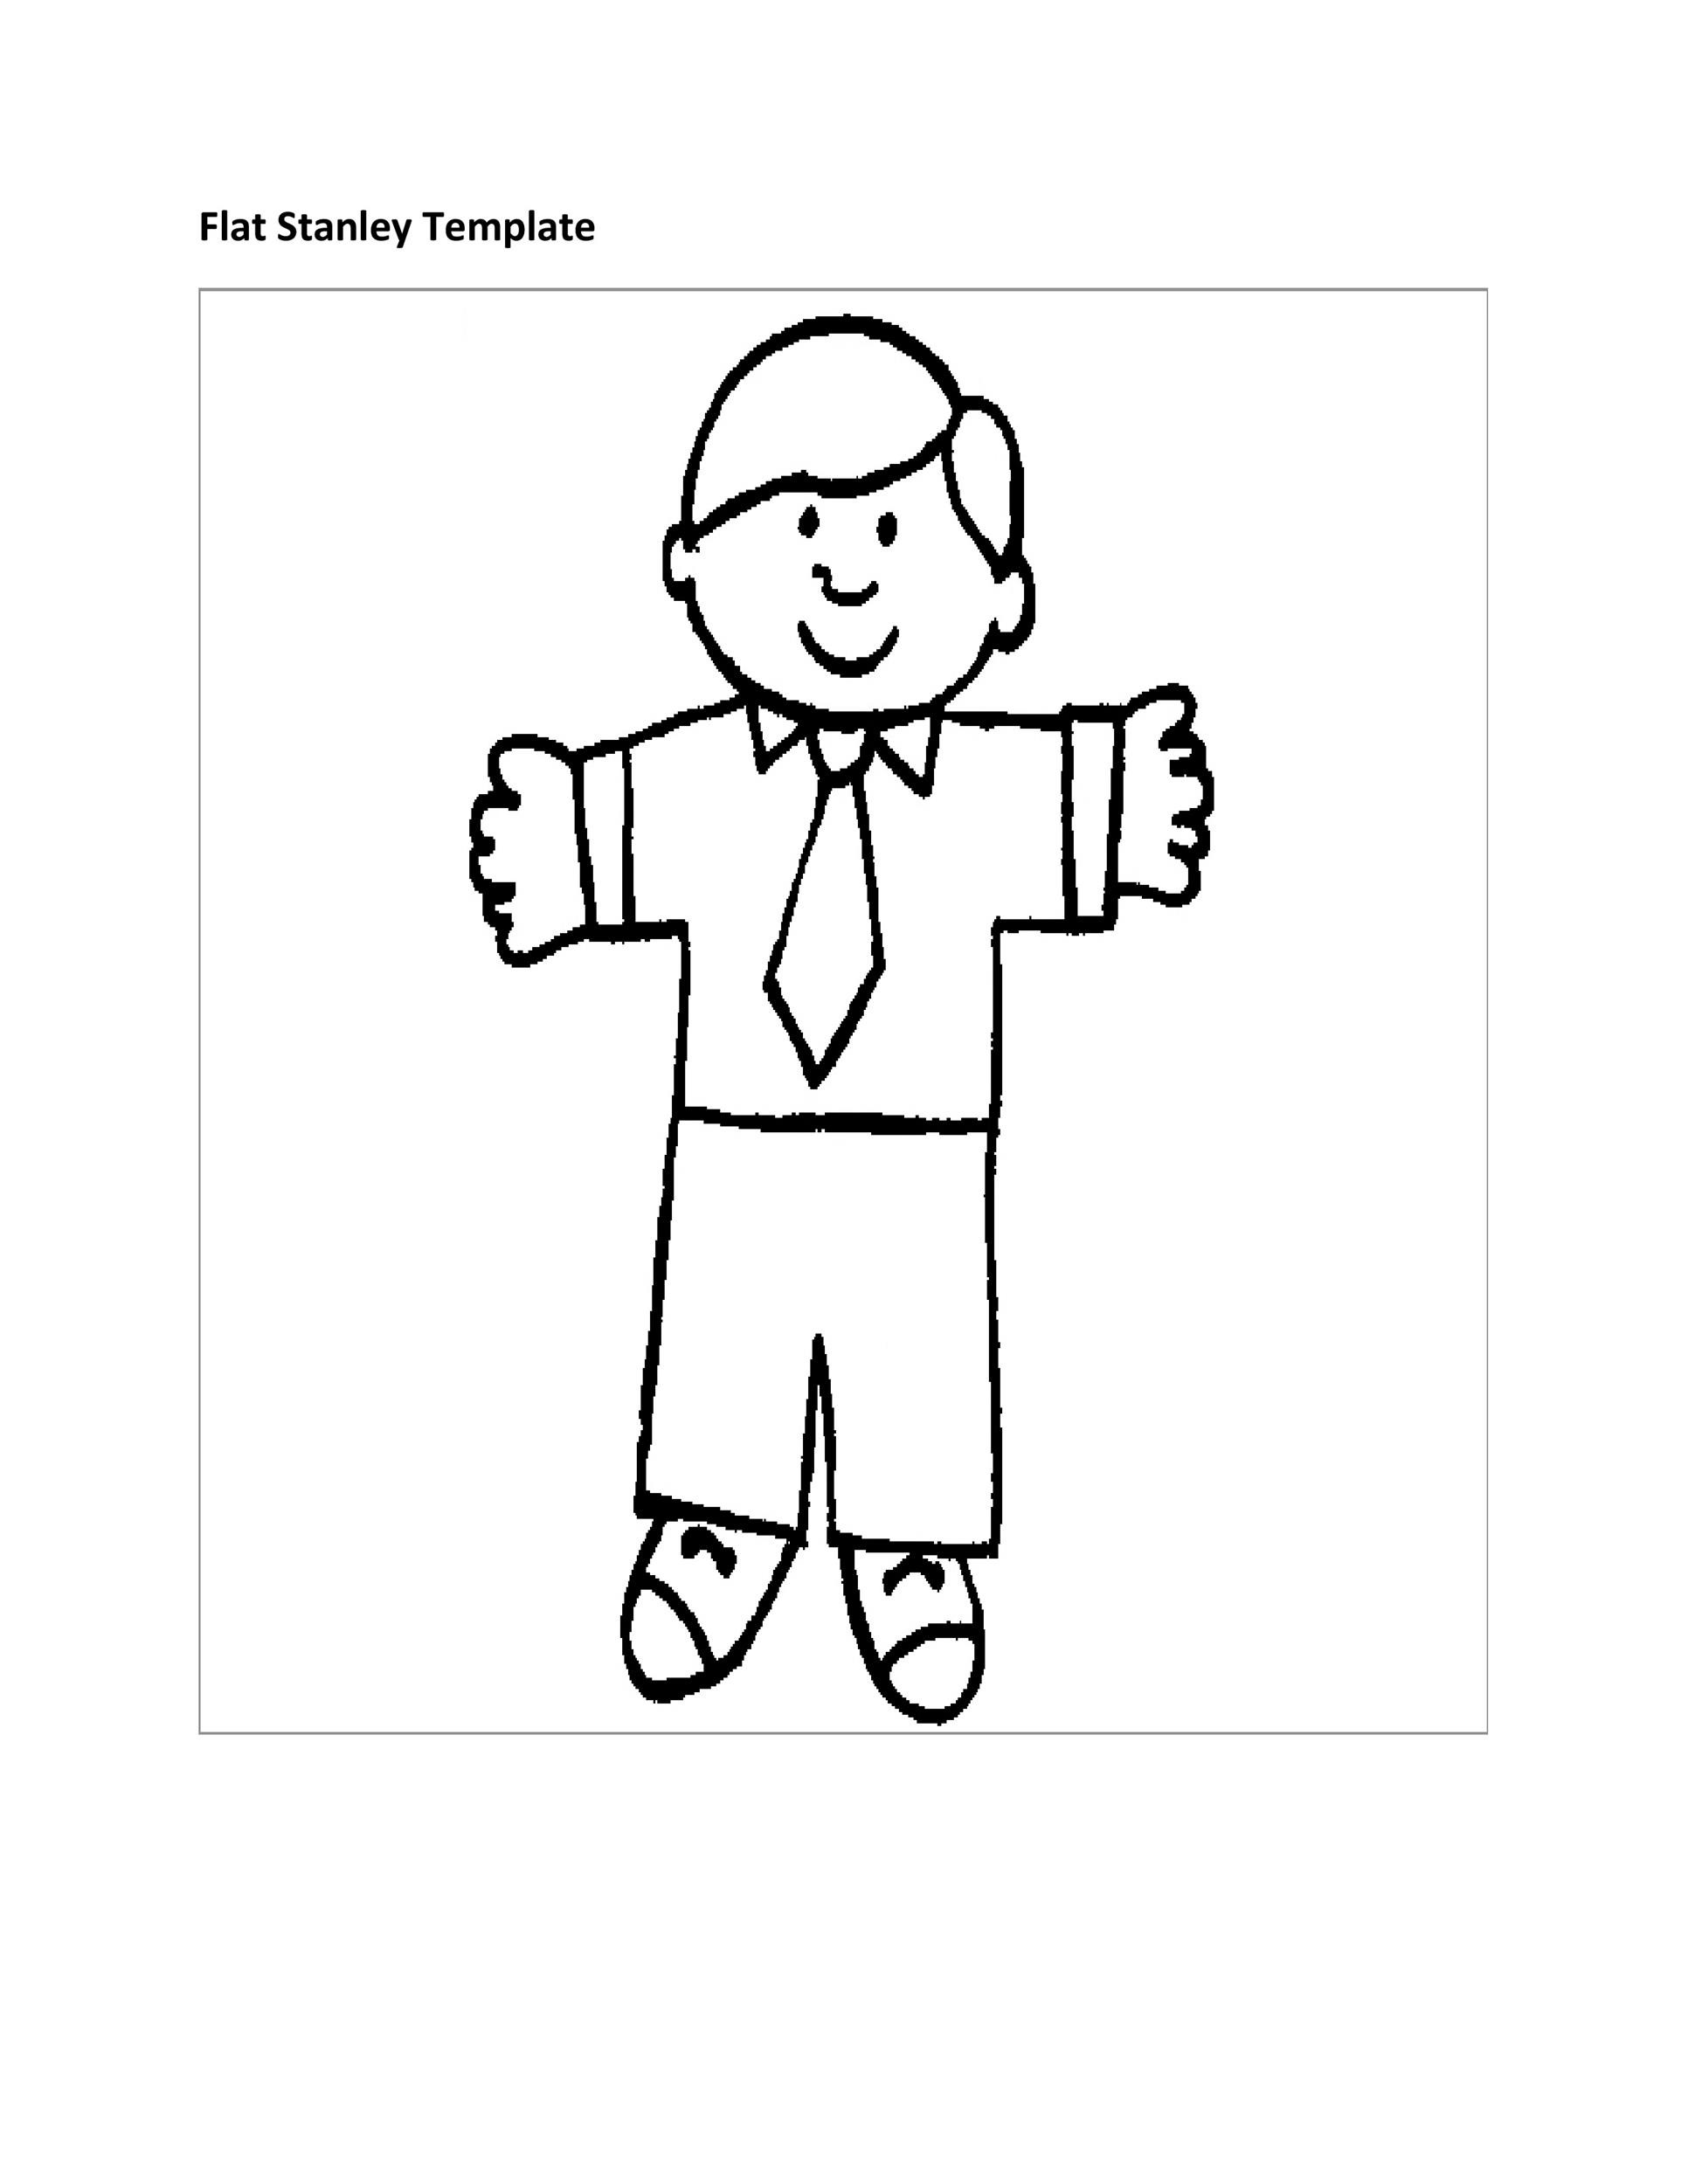 37-flat-stanley-templates-letter-examples-template-lab